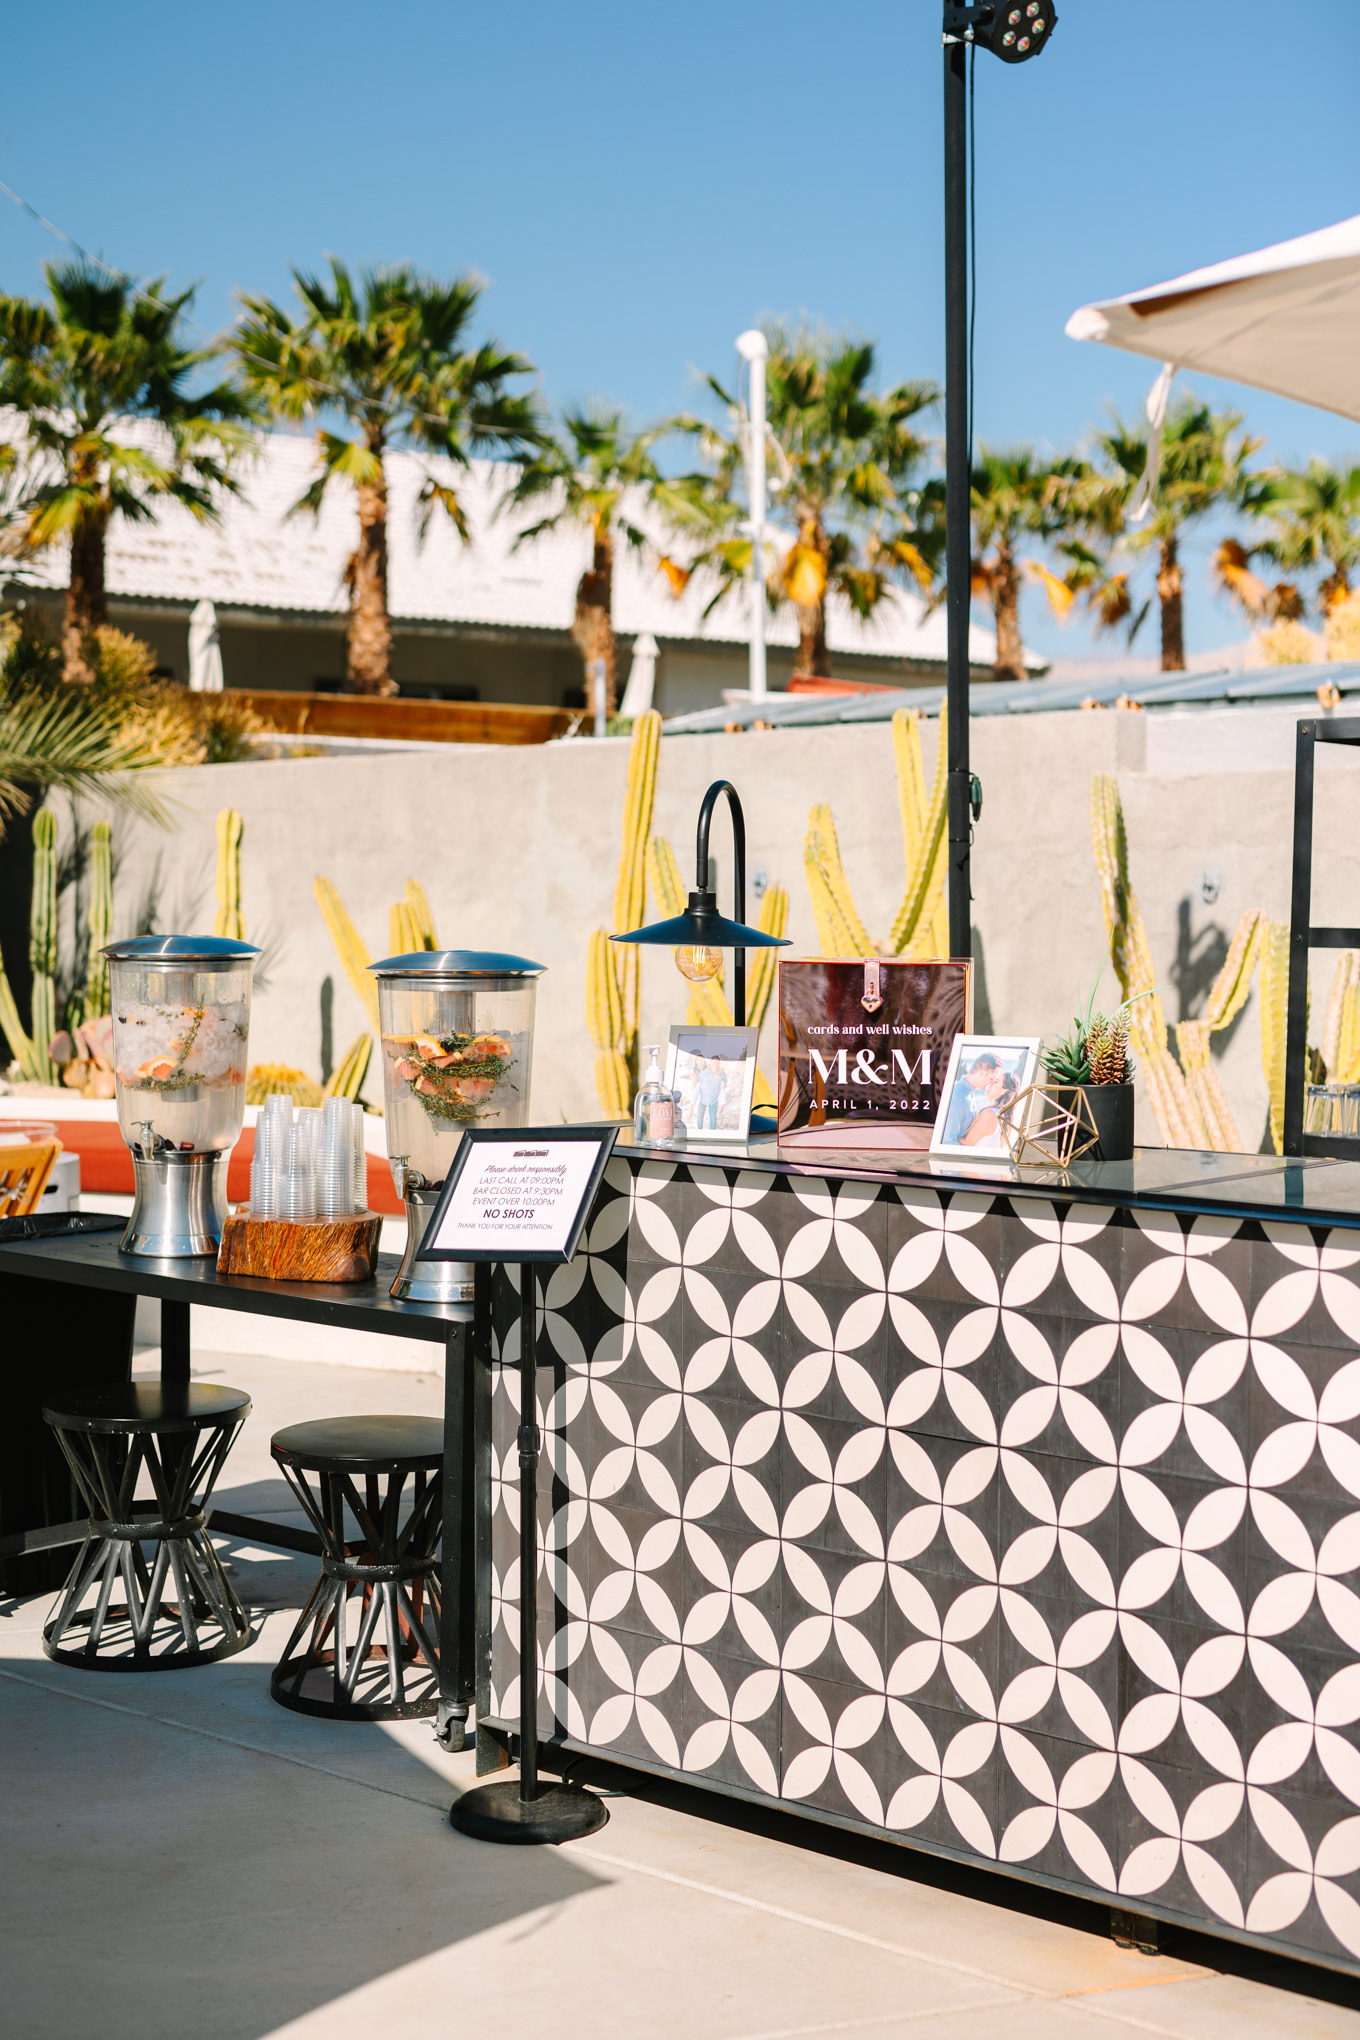 Bar setup at Lautner Compound | Pink and orange Lautner Compound wedding | Colorful Palm Springs wedding photography | #palmspringsphotographer #palmspringswedding #lautnercompound #southerncaliforniawedding  Source: Mary Costa Photography | Los Angeles